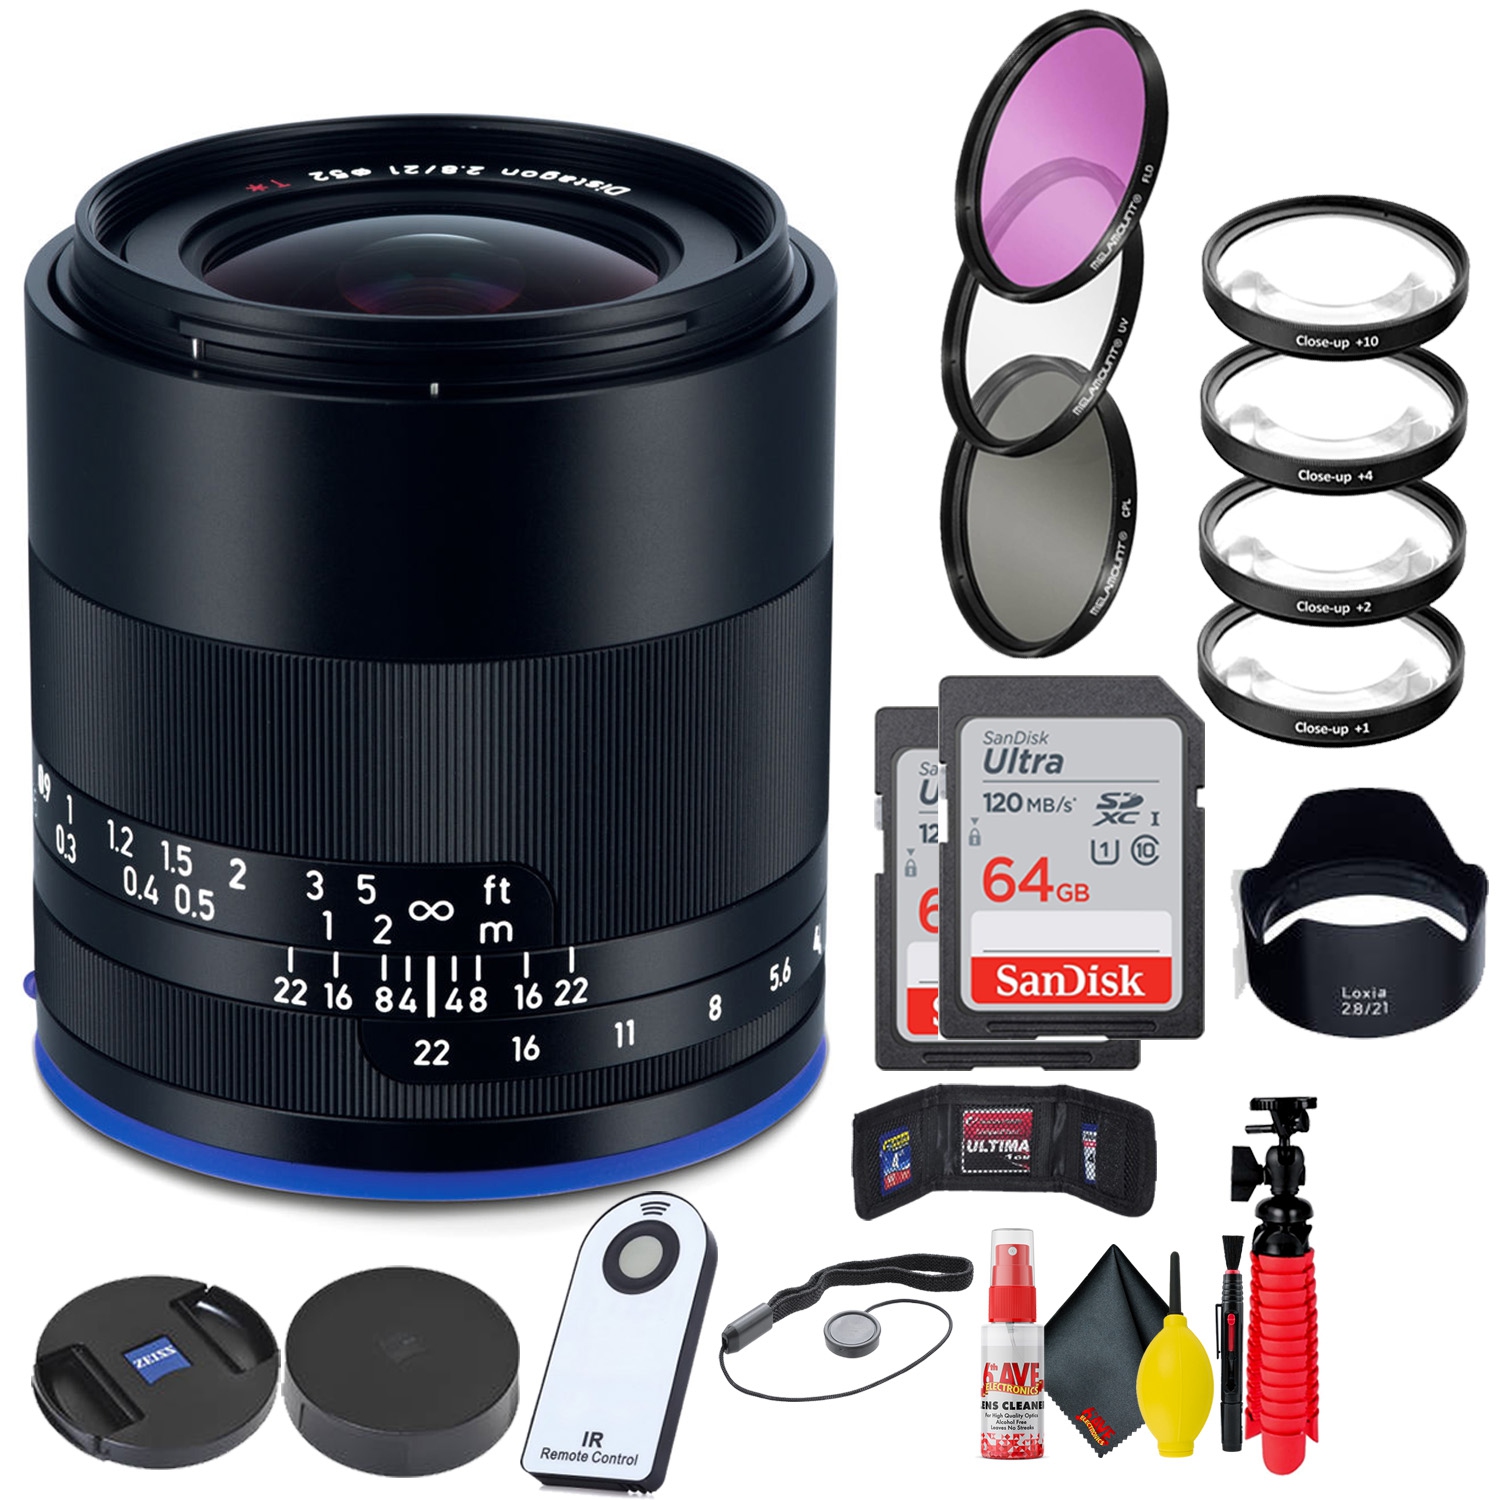 Zeiss Loxia 21mm f/2.8 Lens for Sony E Mount + (2)64GB SD Card Bundle